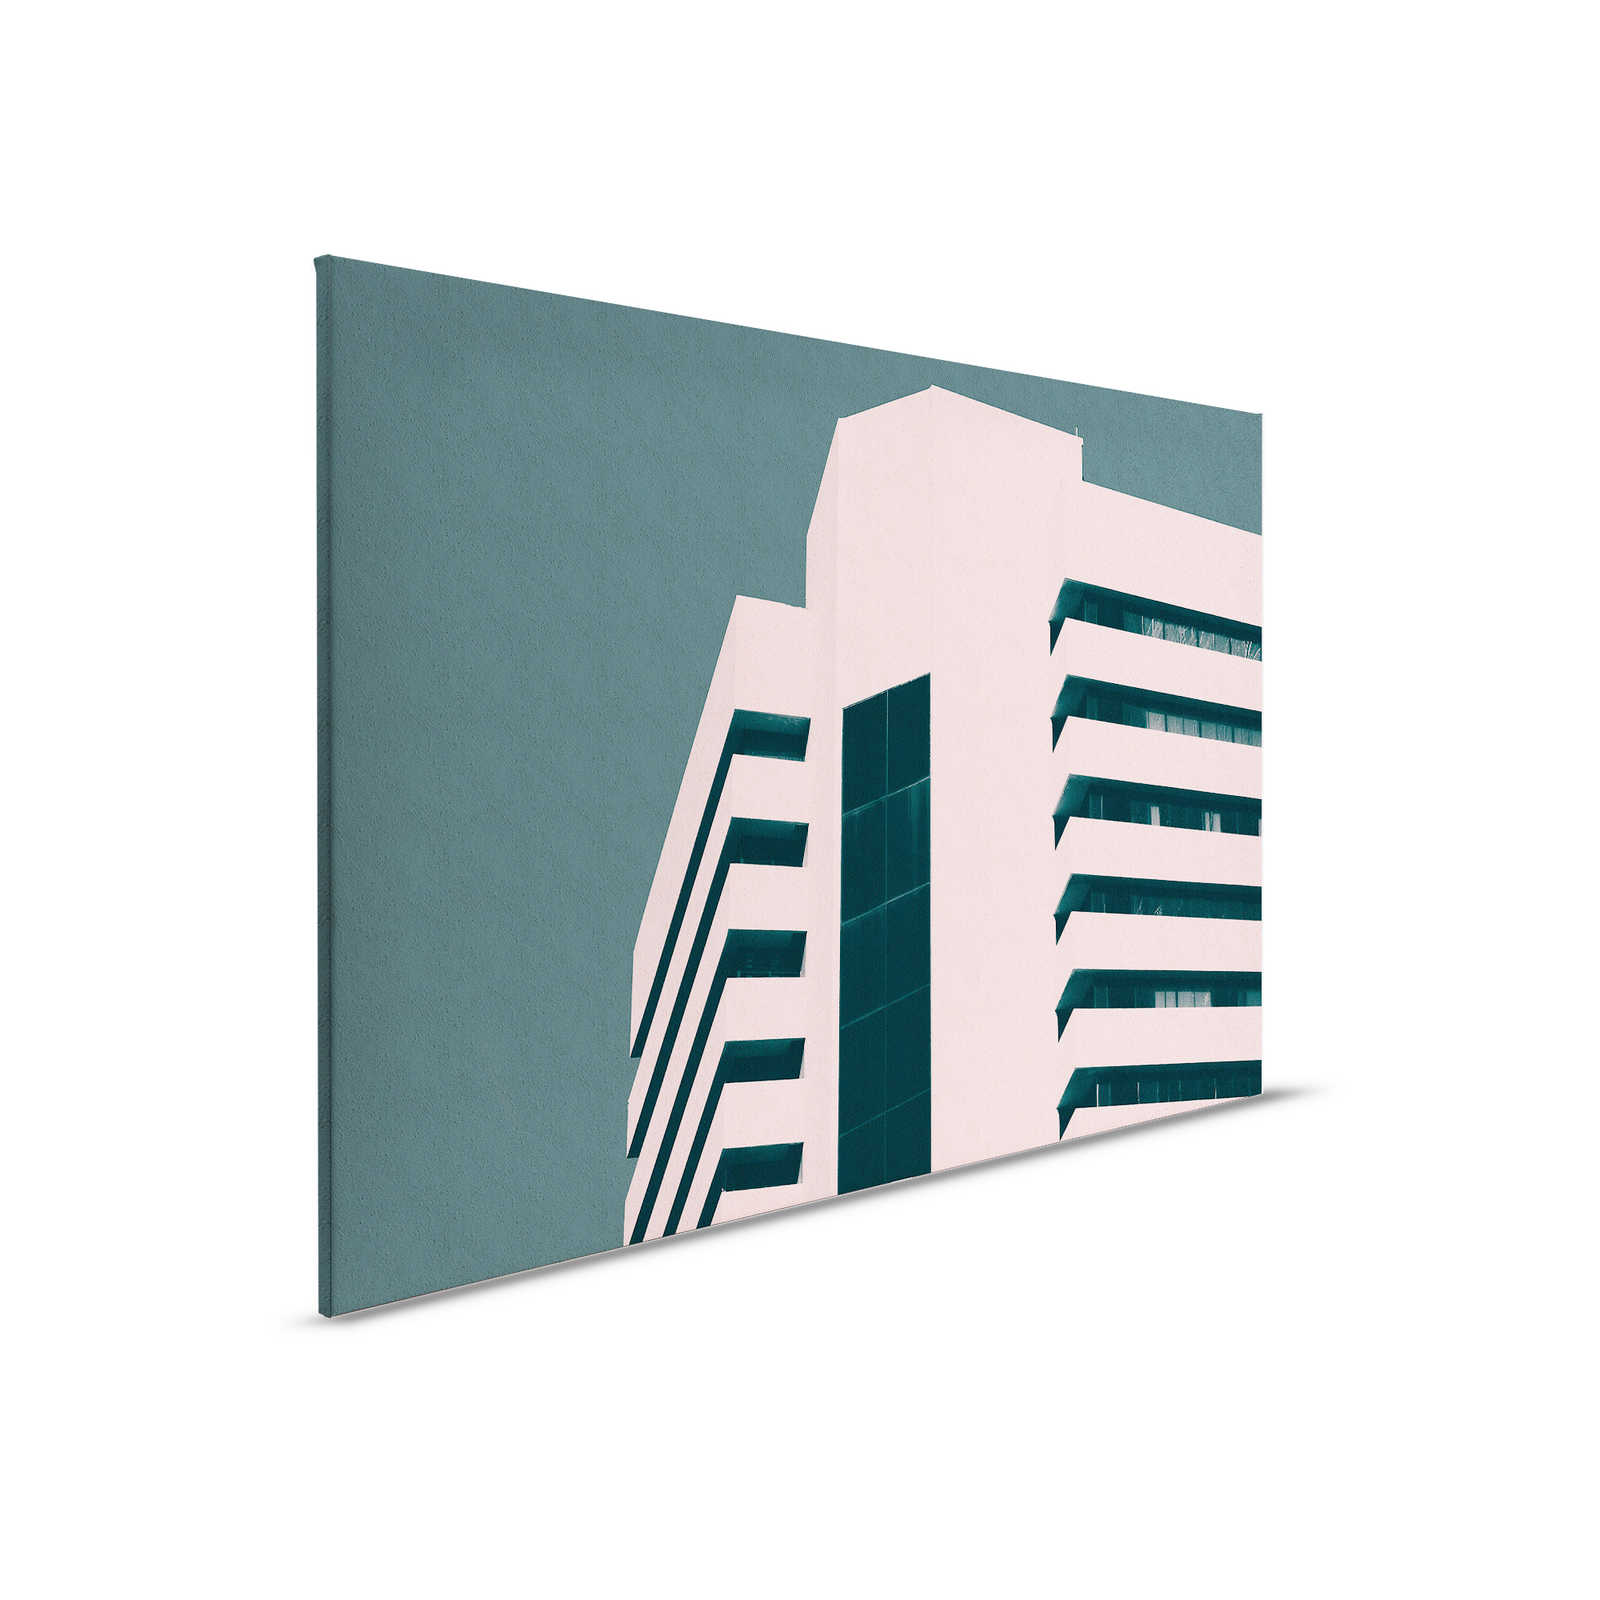         Skyscraper 2 - Canvas painting with modern city architecture - roughcast structure - 0.90 m x 0.60 m
    